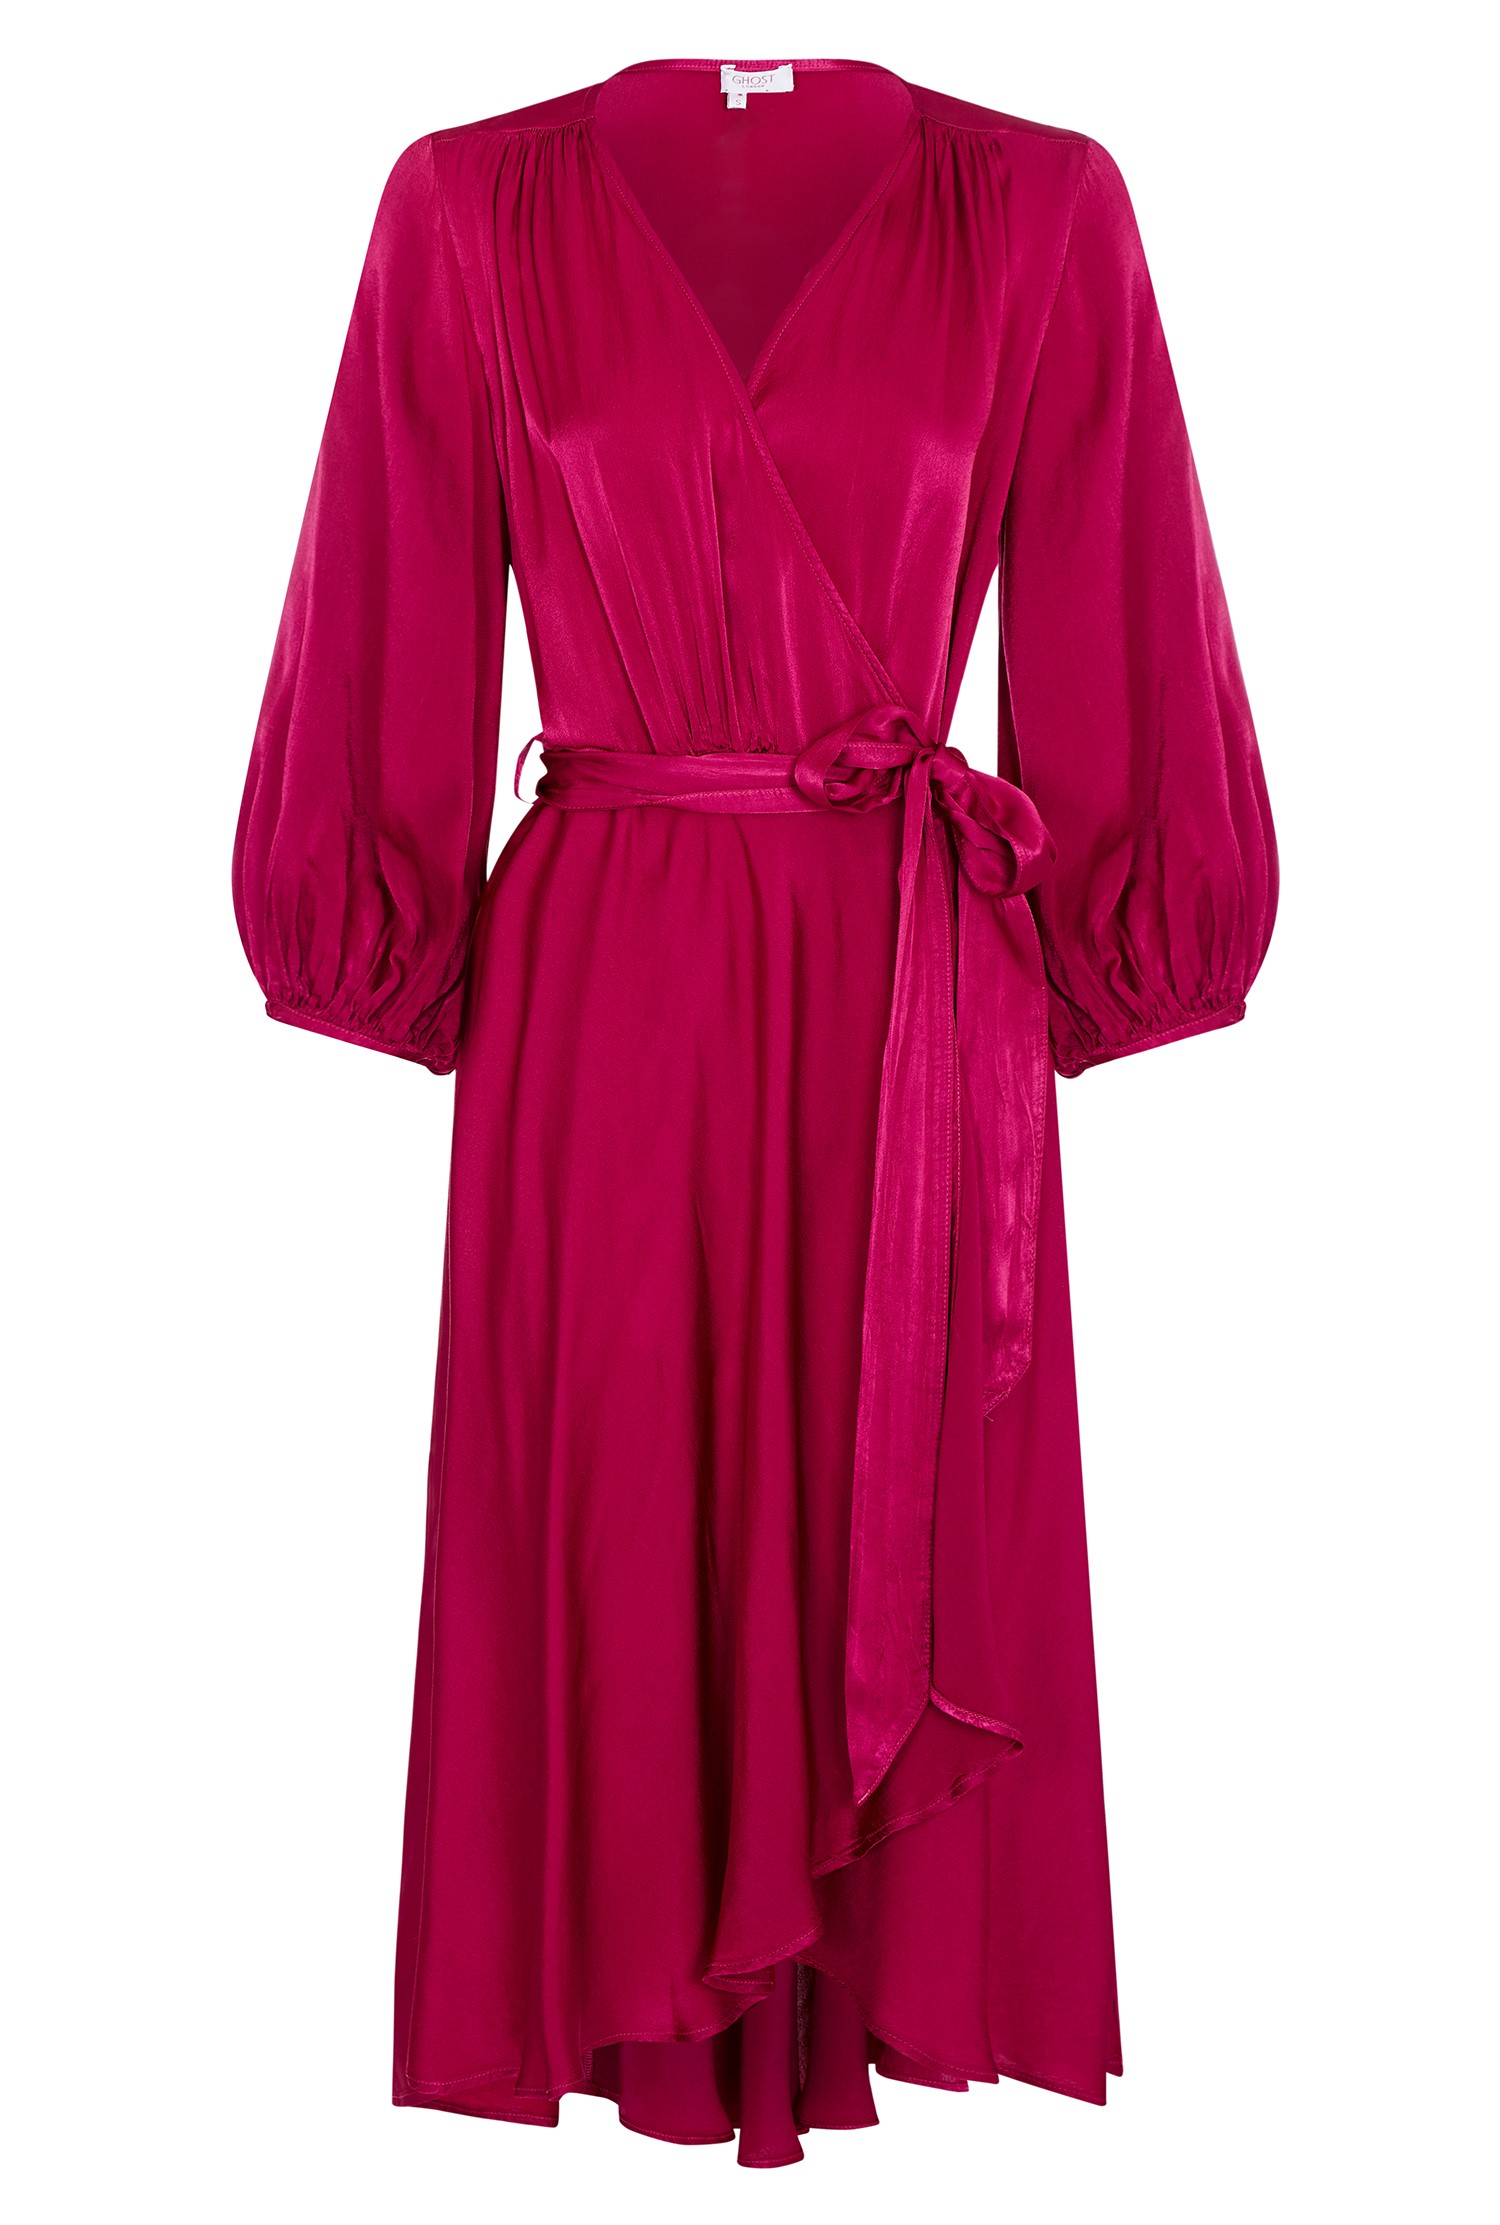 Aggie Berry Satin Wrap Dress with Sleeves | Ghost London